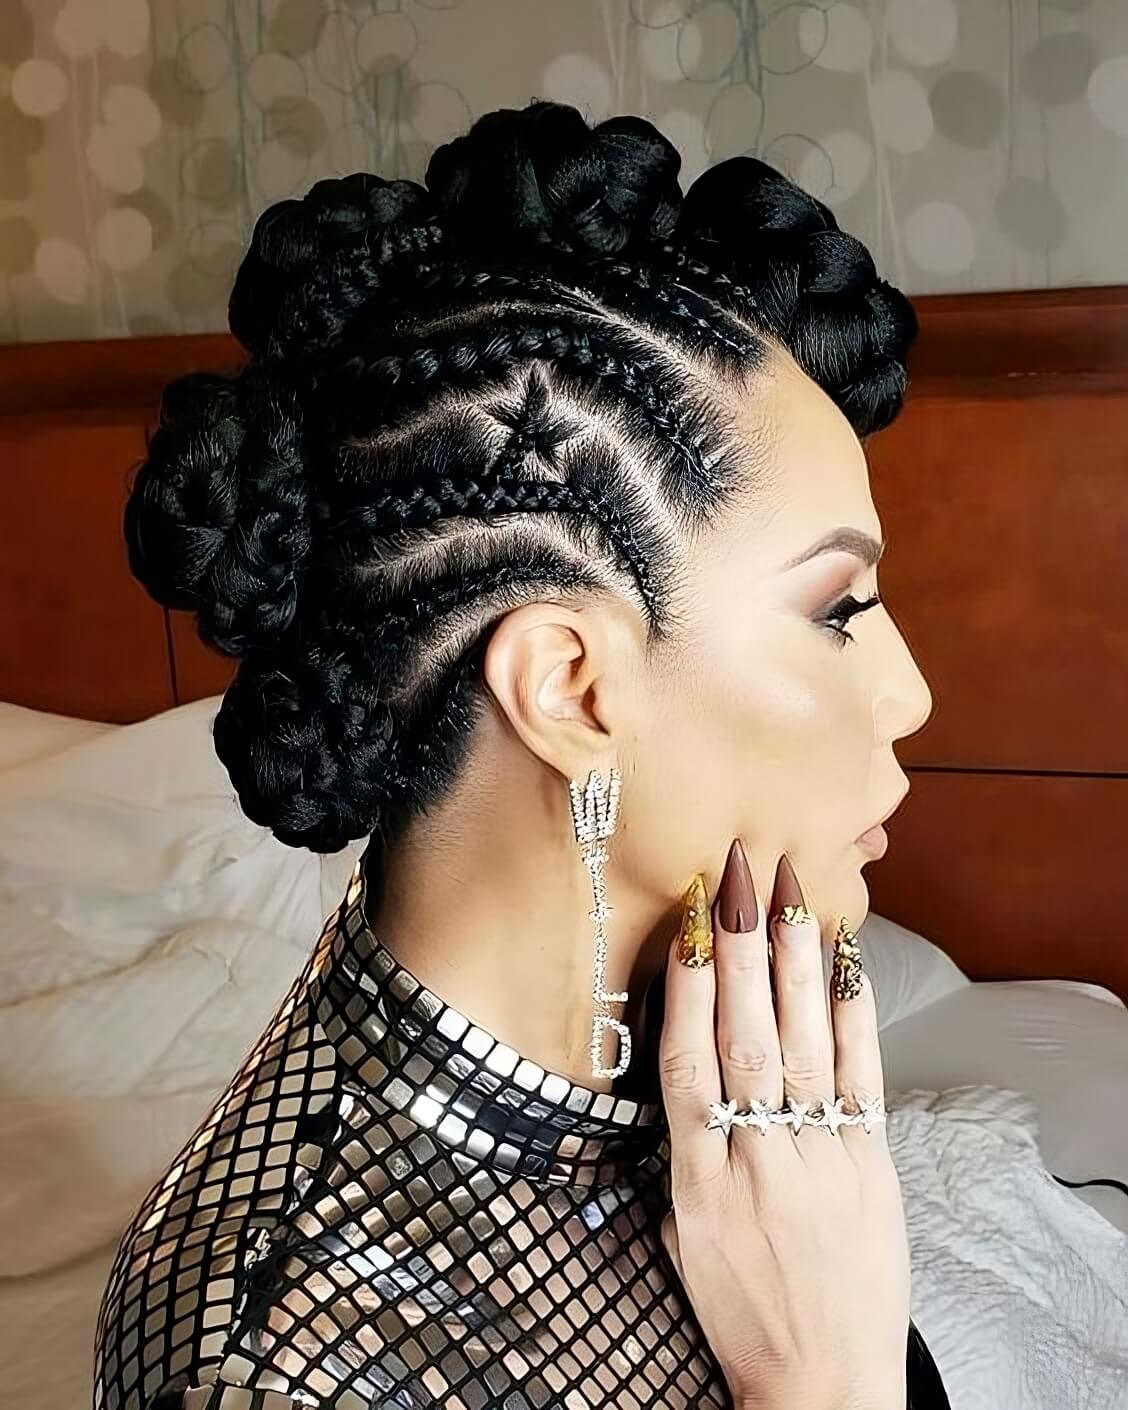 50 Trendy Braided Hairstyles To Instantly Glam Up Your Look - 381